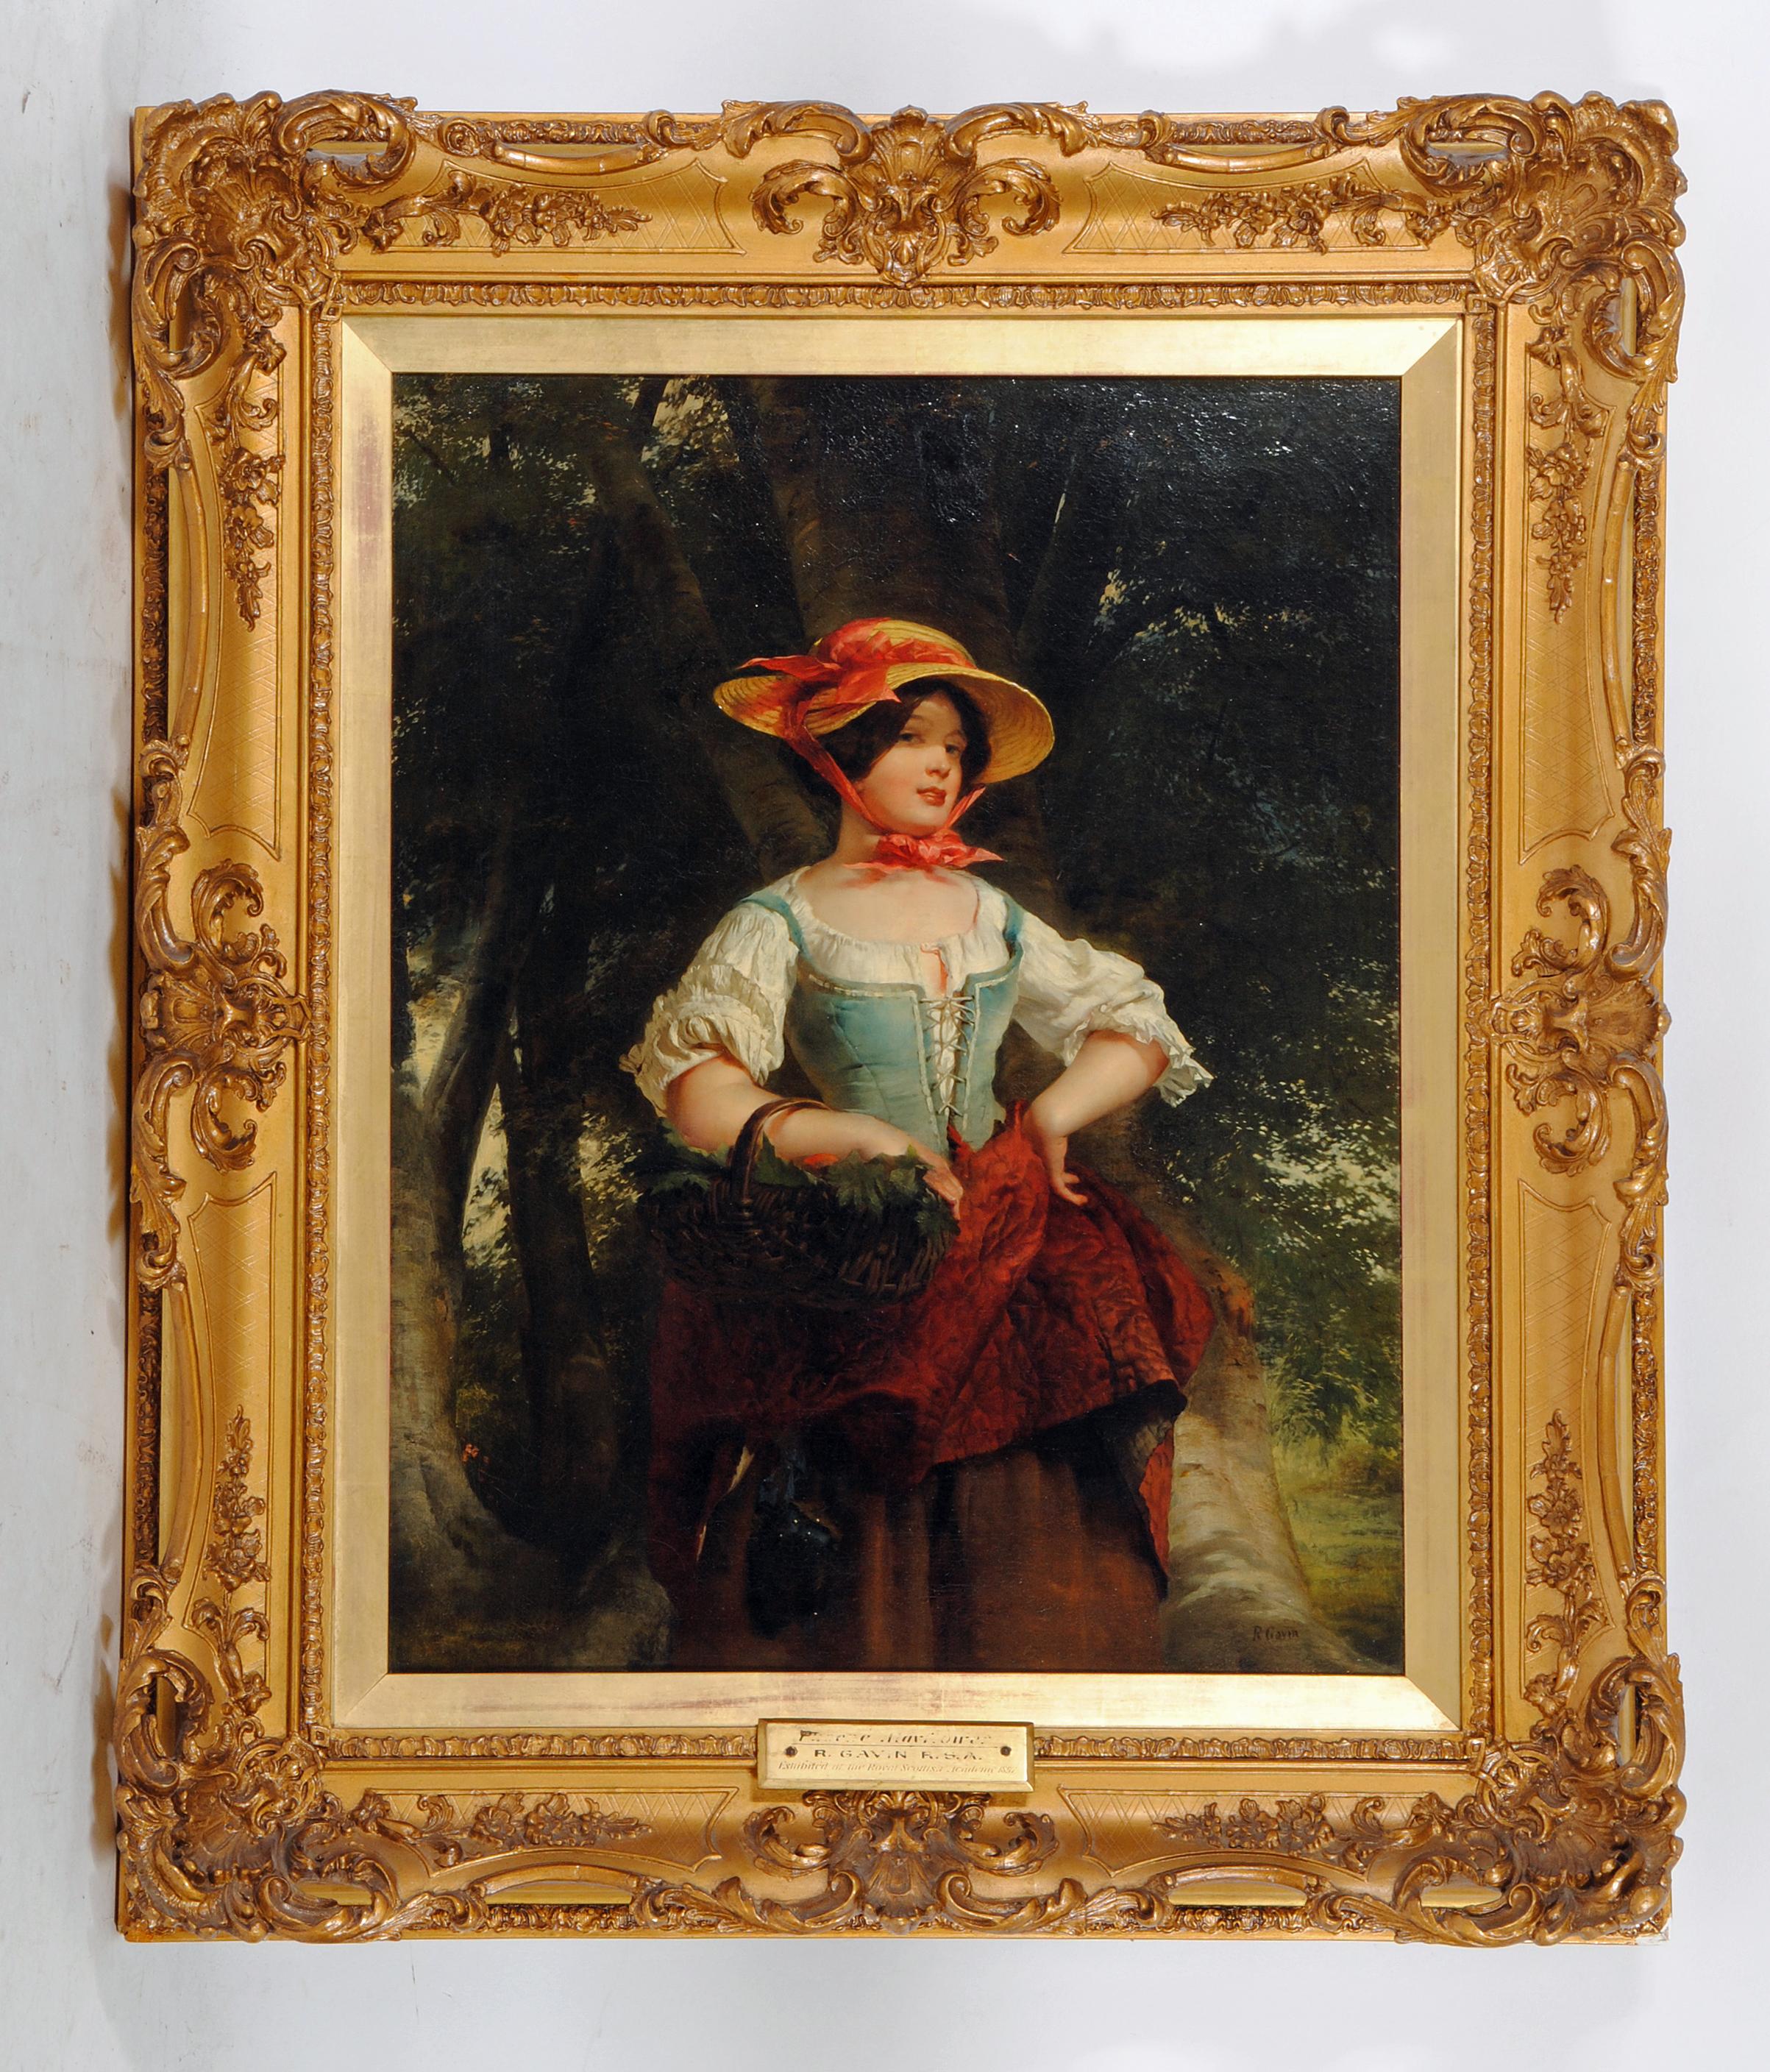 ROBERT GAVIN  R.S.A. (1827-1883), Portrait of Phoebe Mayflower, oil on canvas, signed, old label - Image 4 of 12